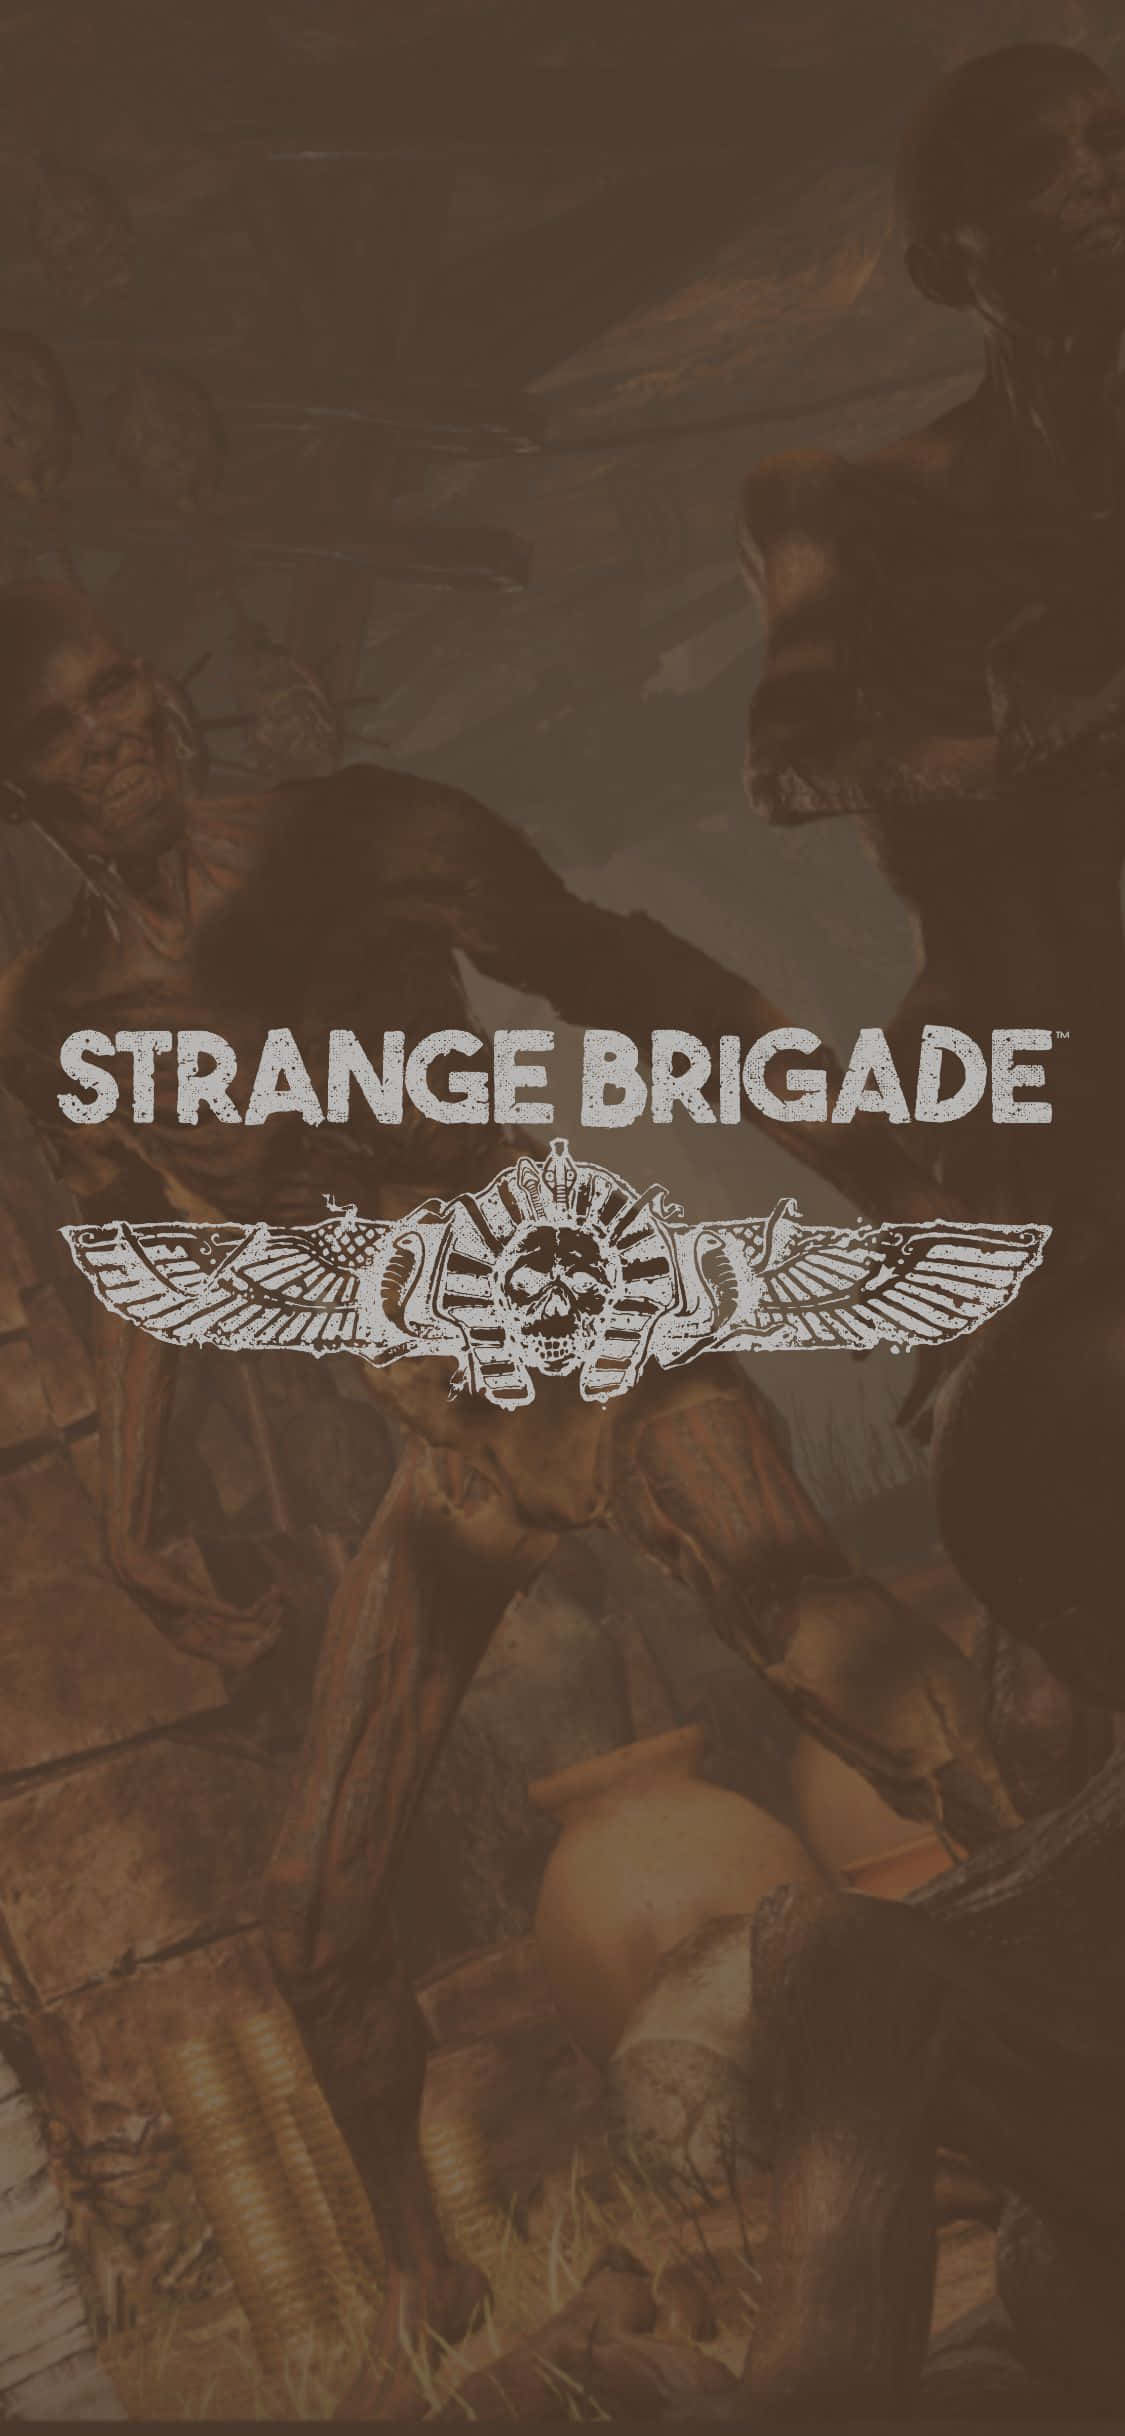 Embark on an Adventure with Iphone X and Strange Brigade